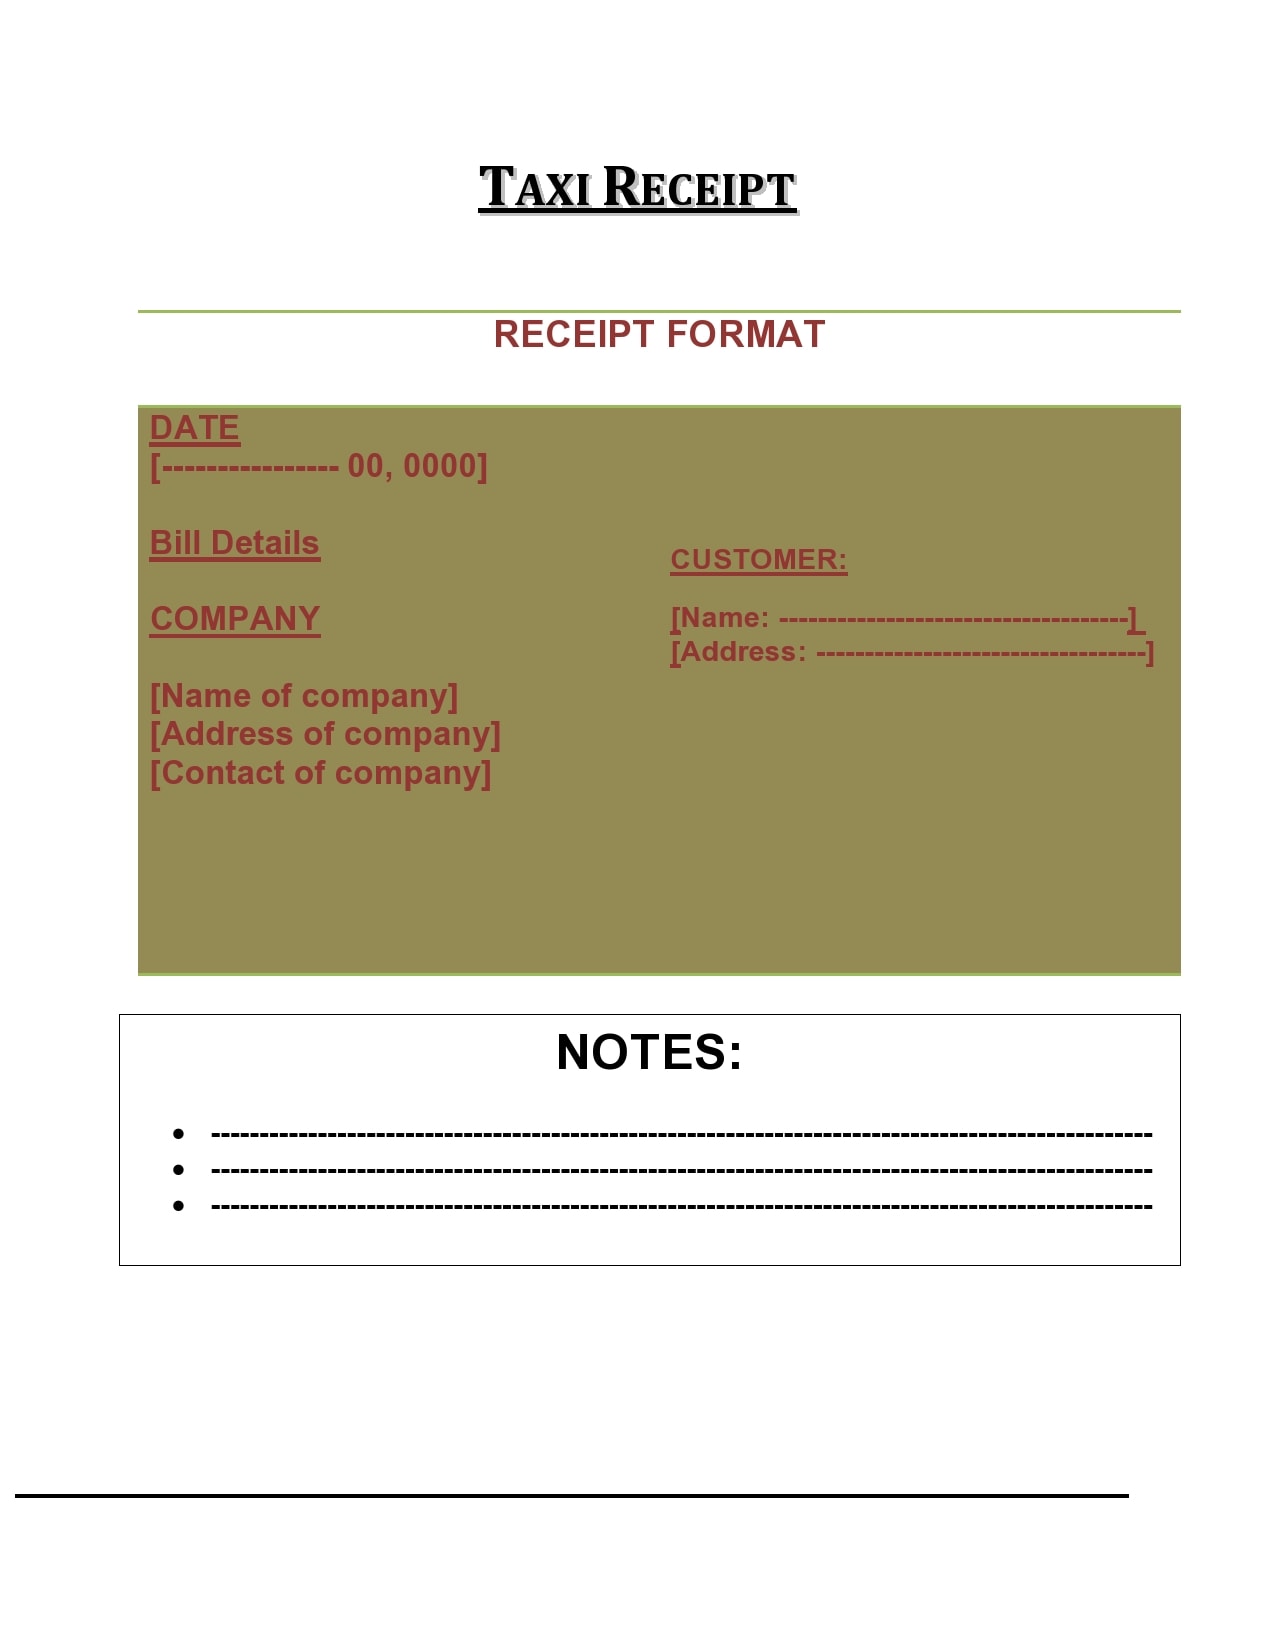 30 blank taxi receipt templates free templatearchive